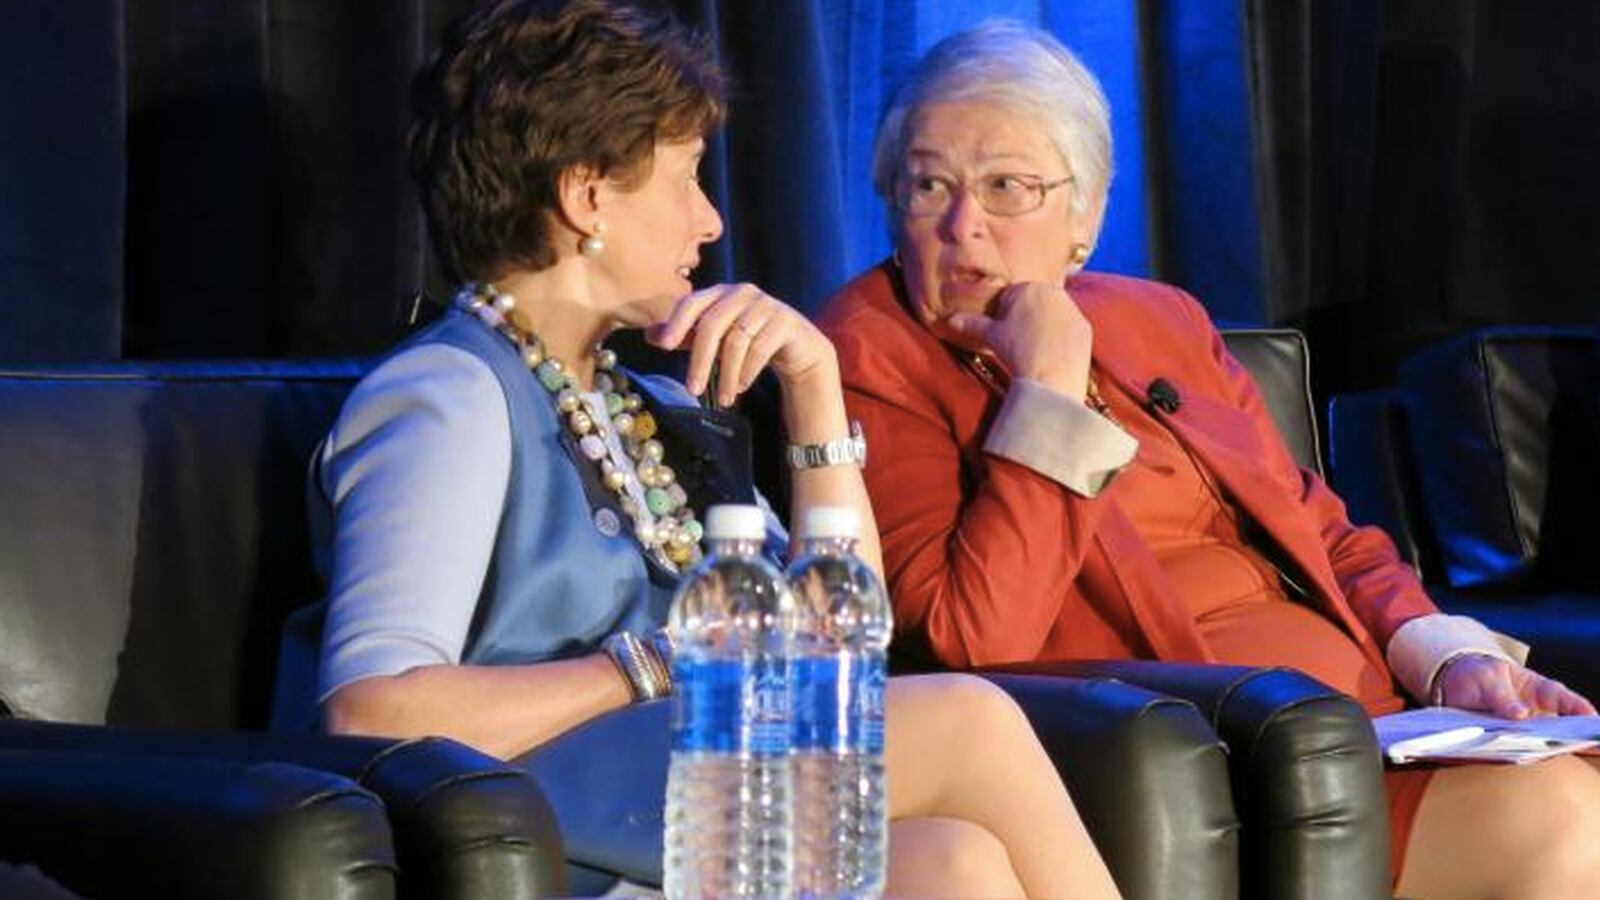 Board of Regents Chancellor Merryl Tisch, left, is pushing the city's education department under Carmen Fariña to be tougher on low-performing charter schools.